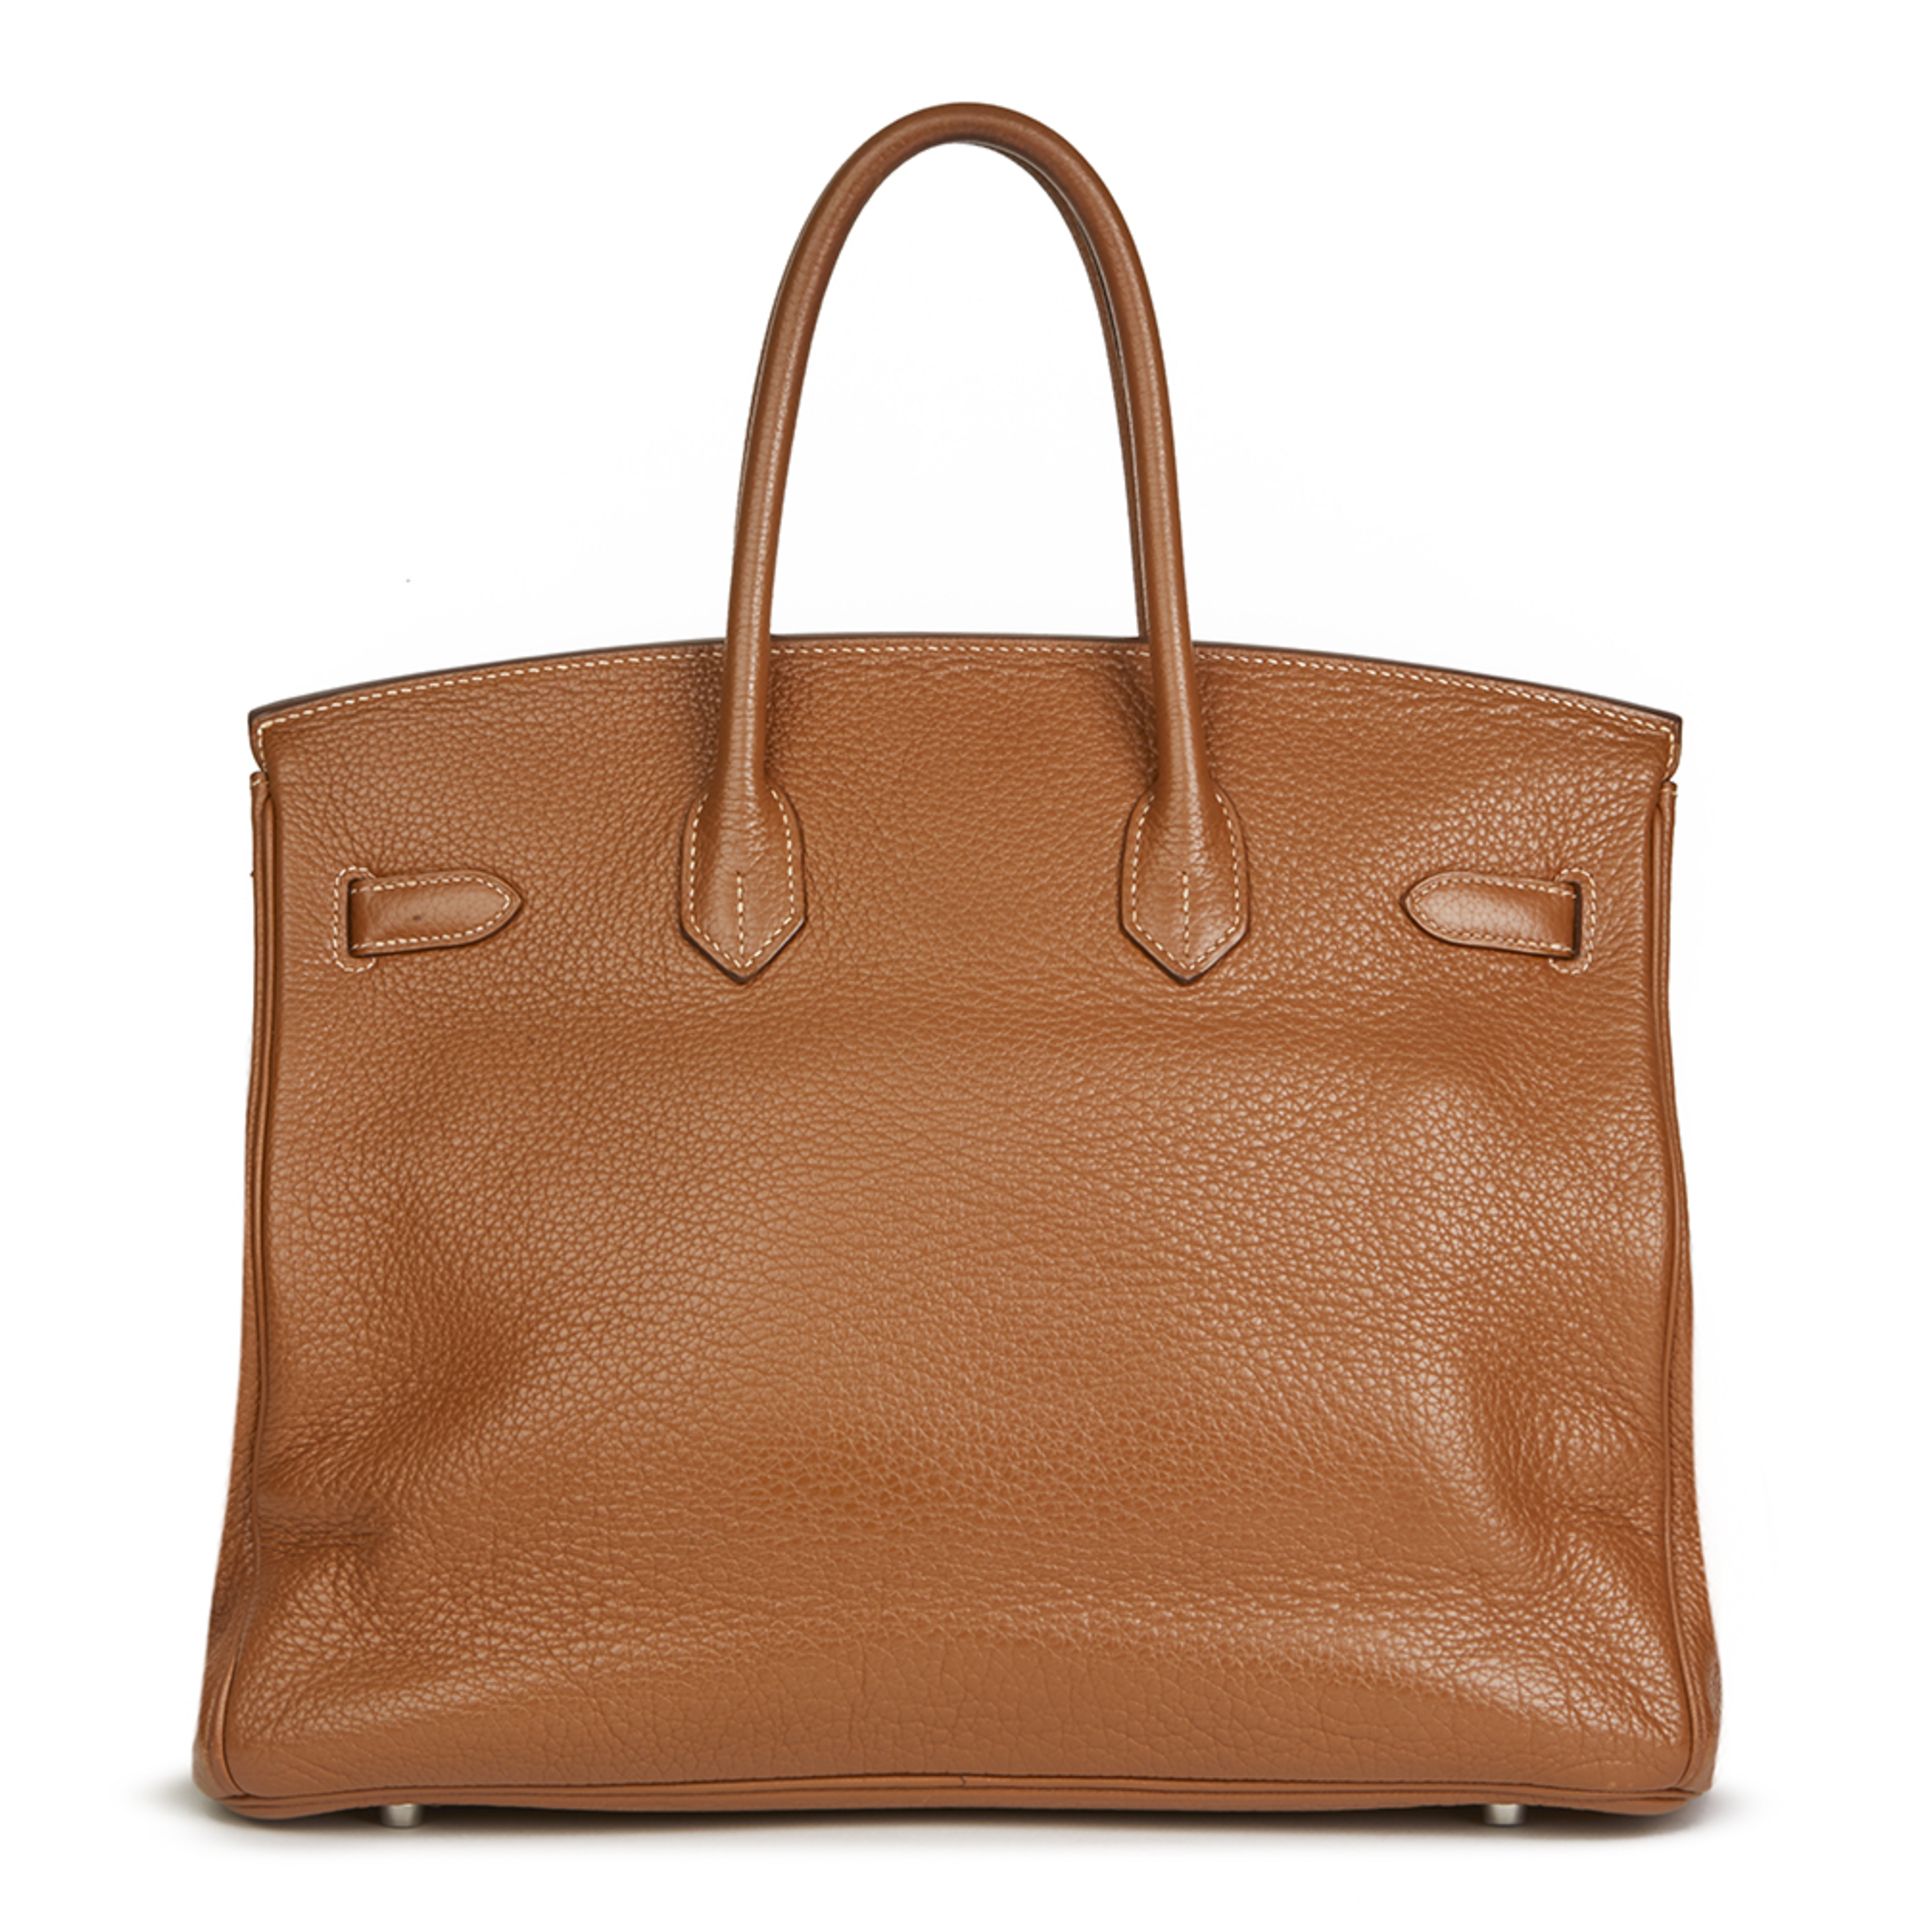 Hermés Gold Clemence Leather Birkin 35cm - Image 11 of 13